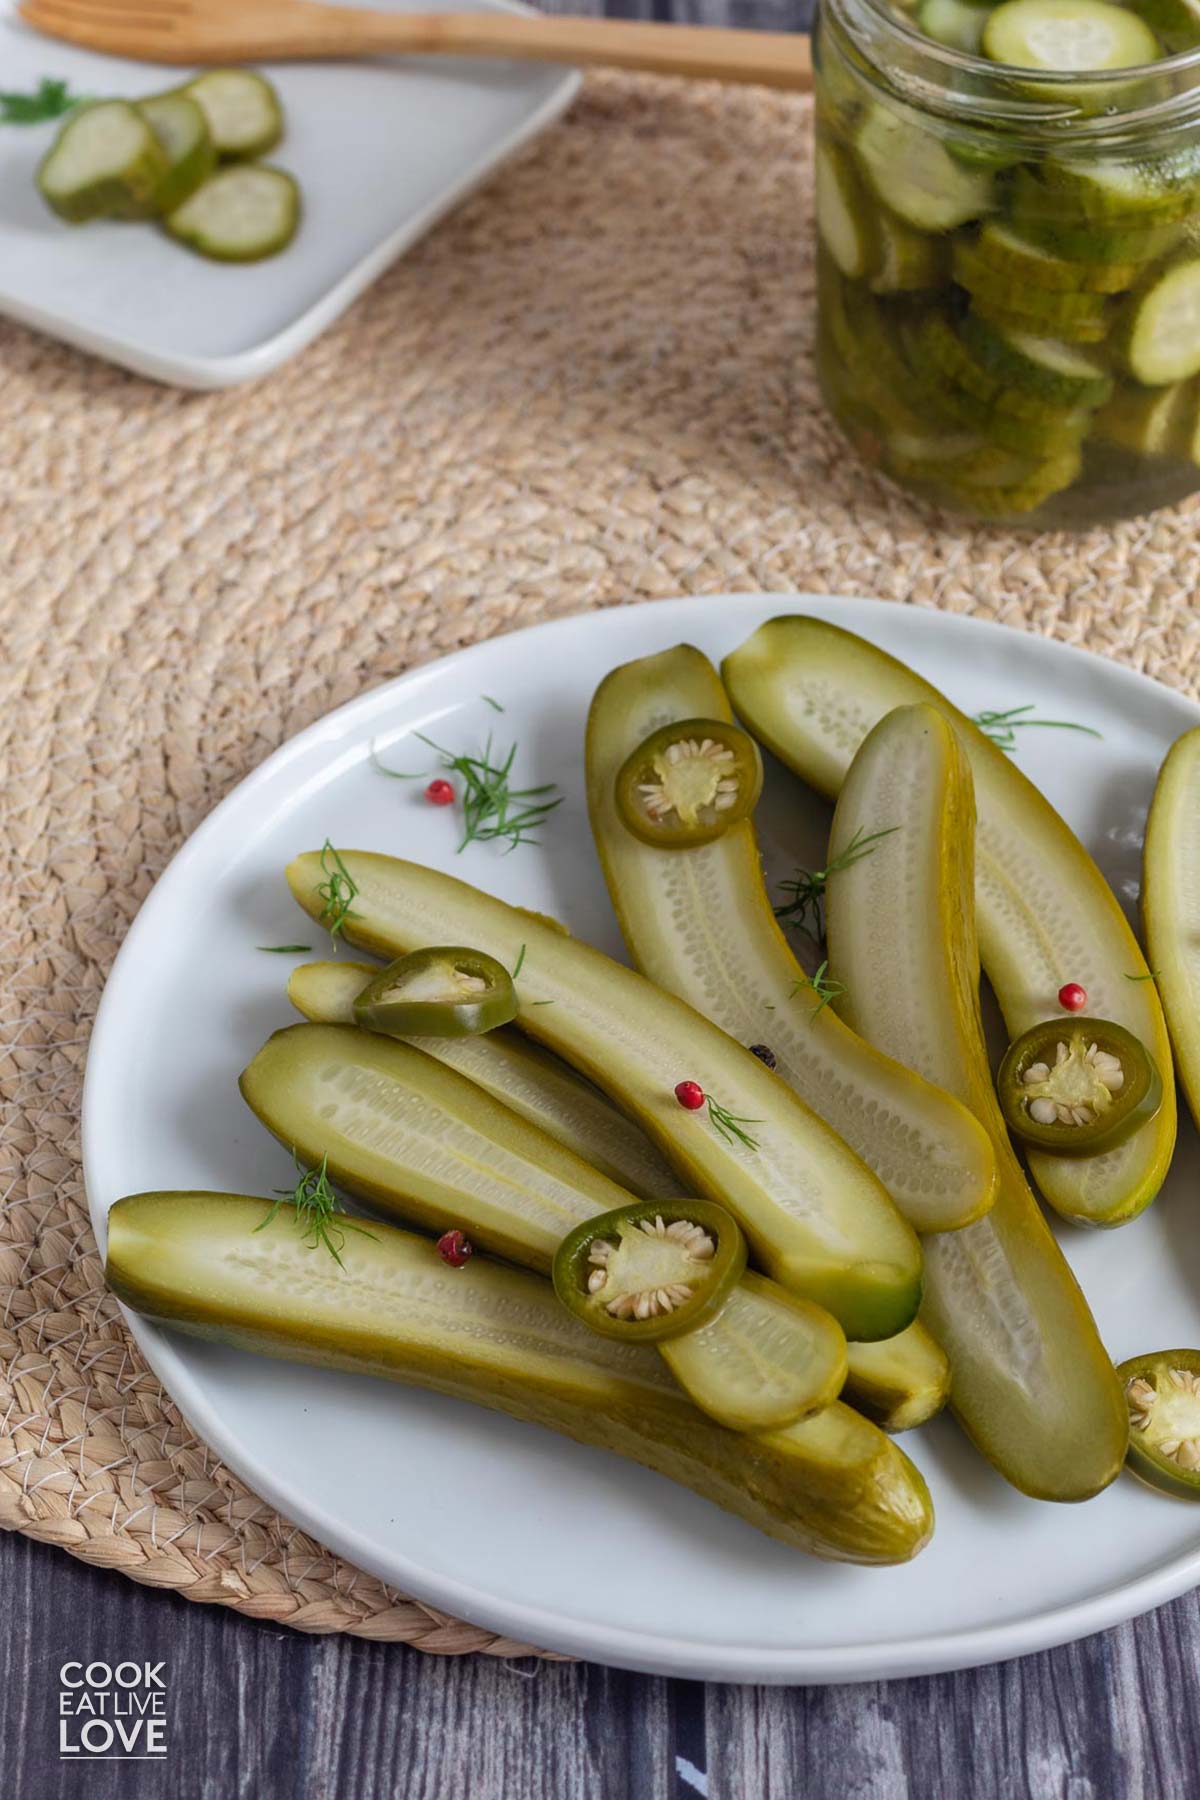 A plate of small batch refrigerator pickles on a wicker mat on the table.